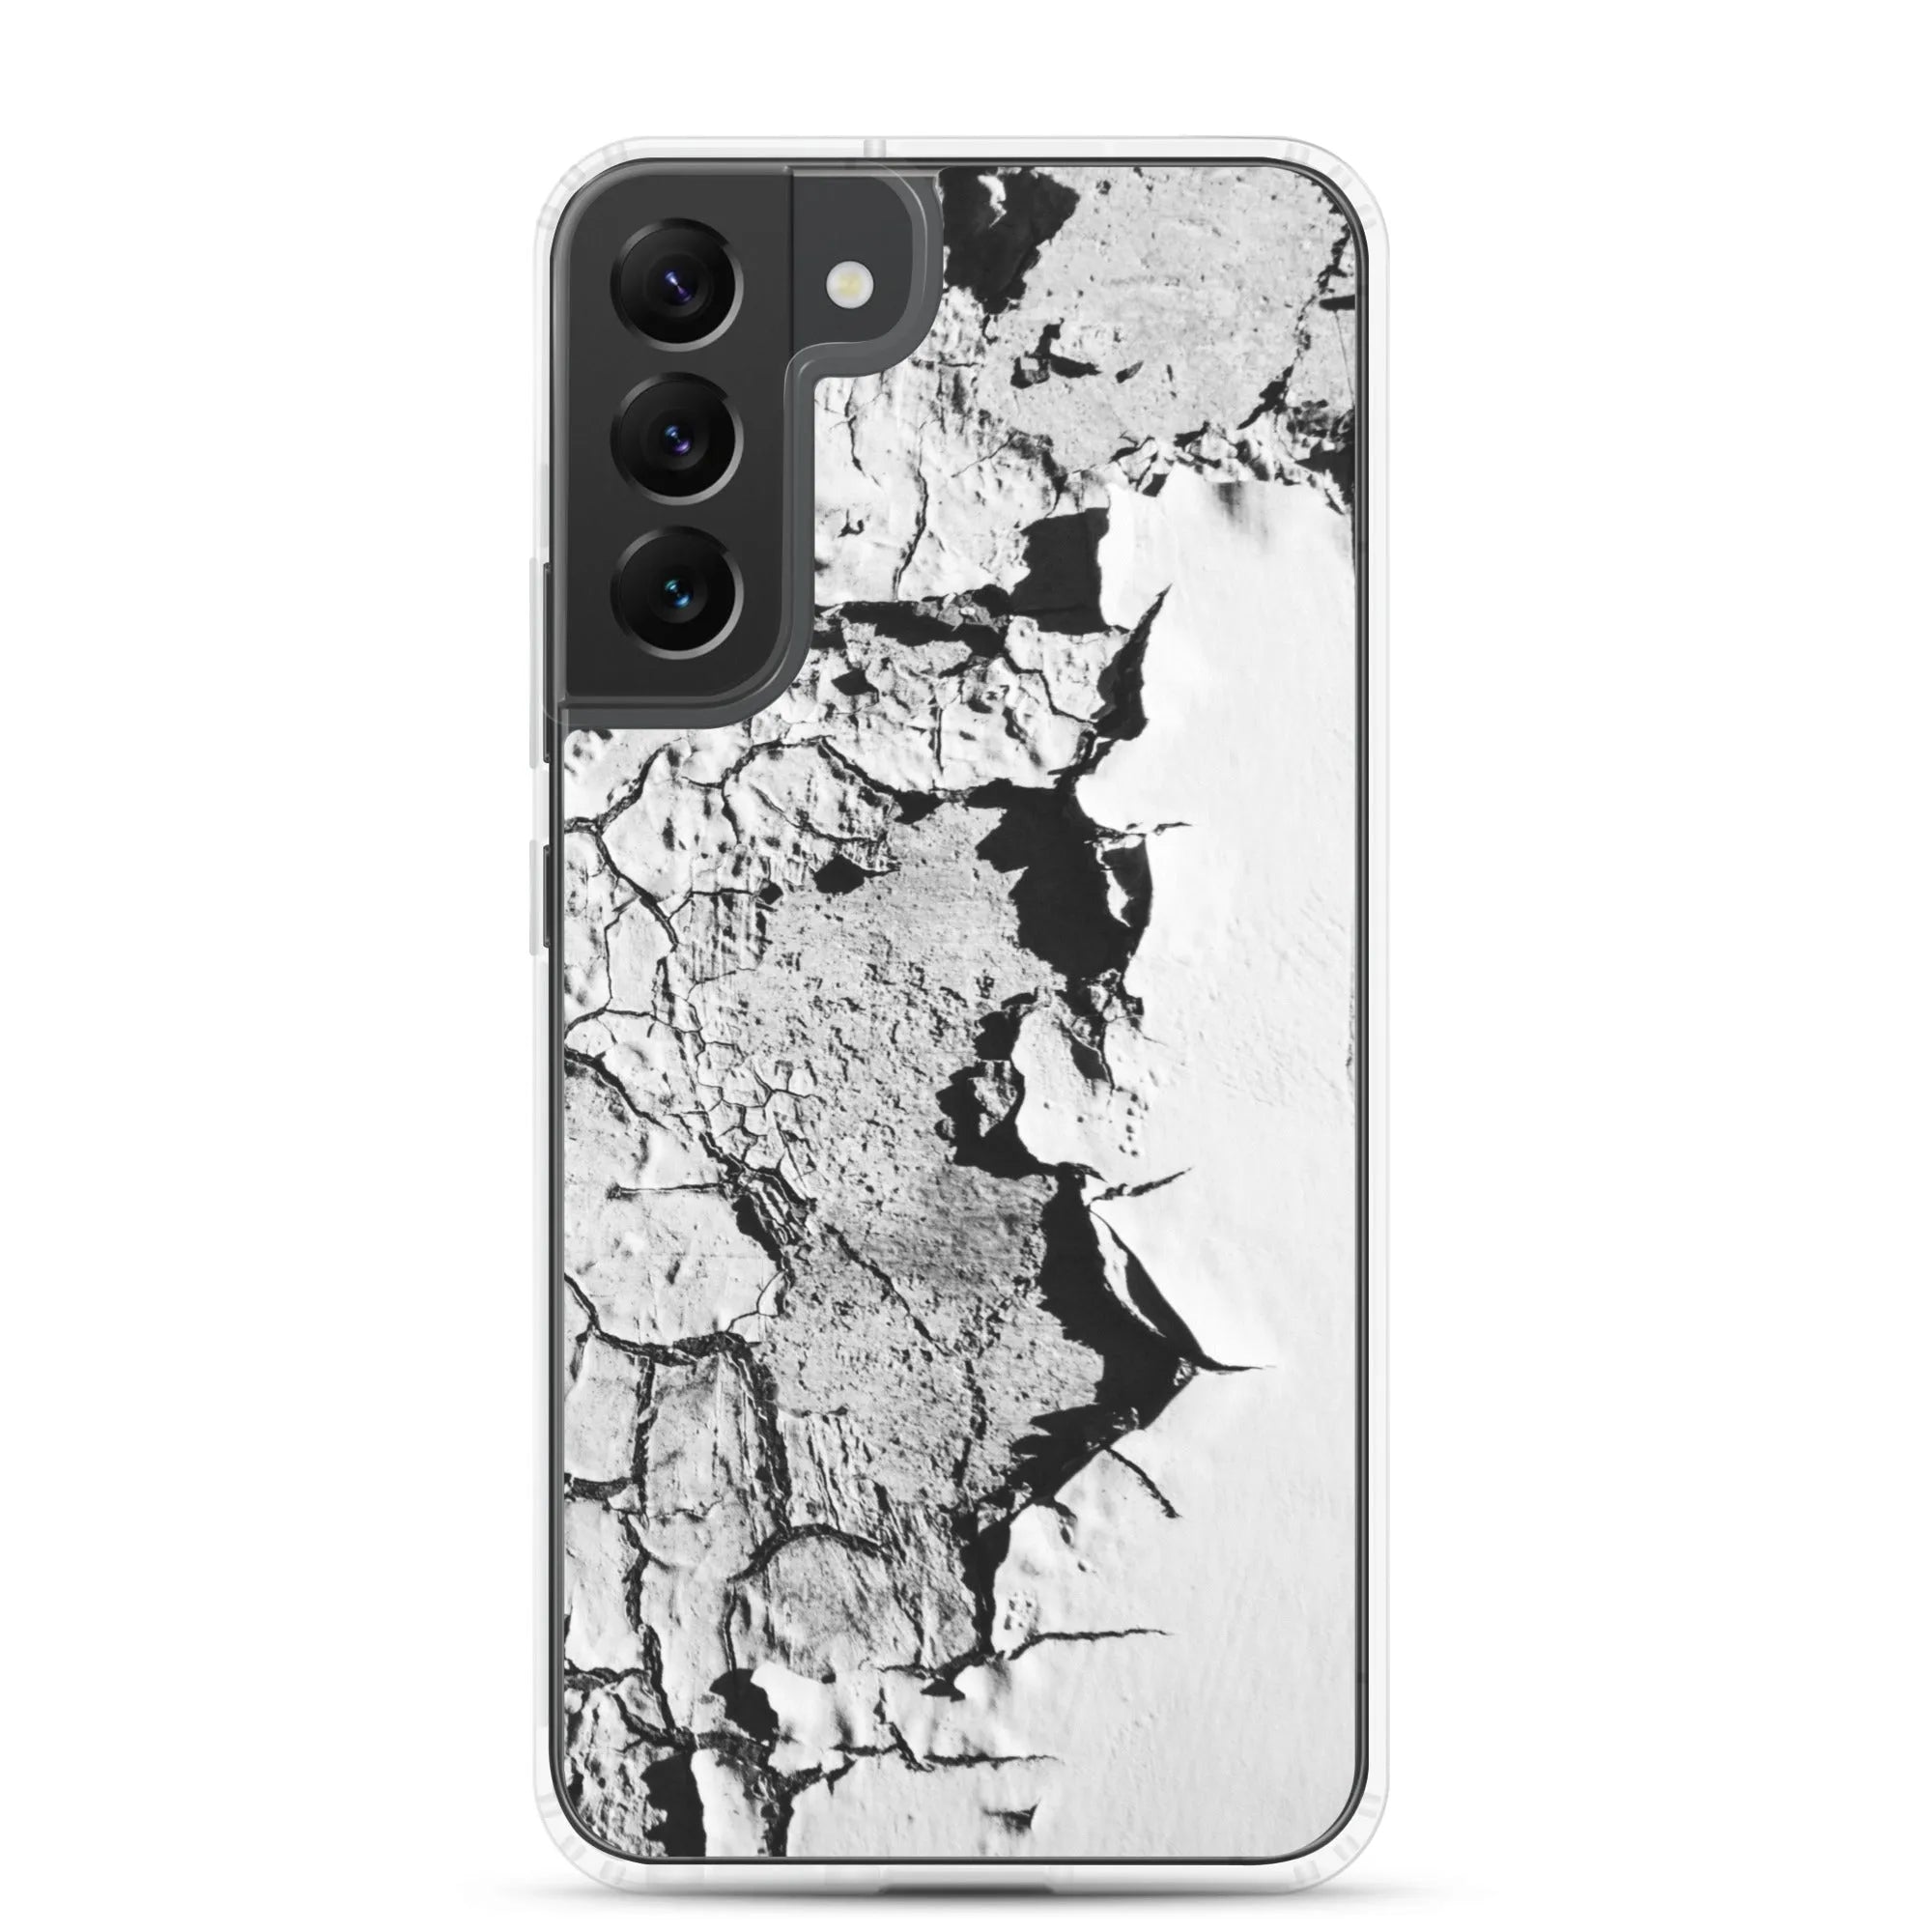 Cracked It Samsung Galaxy Case - Black And White - Samsung Galaxy S22 Plus - Mobile Phone Cases - Aesthetic Art